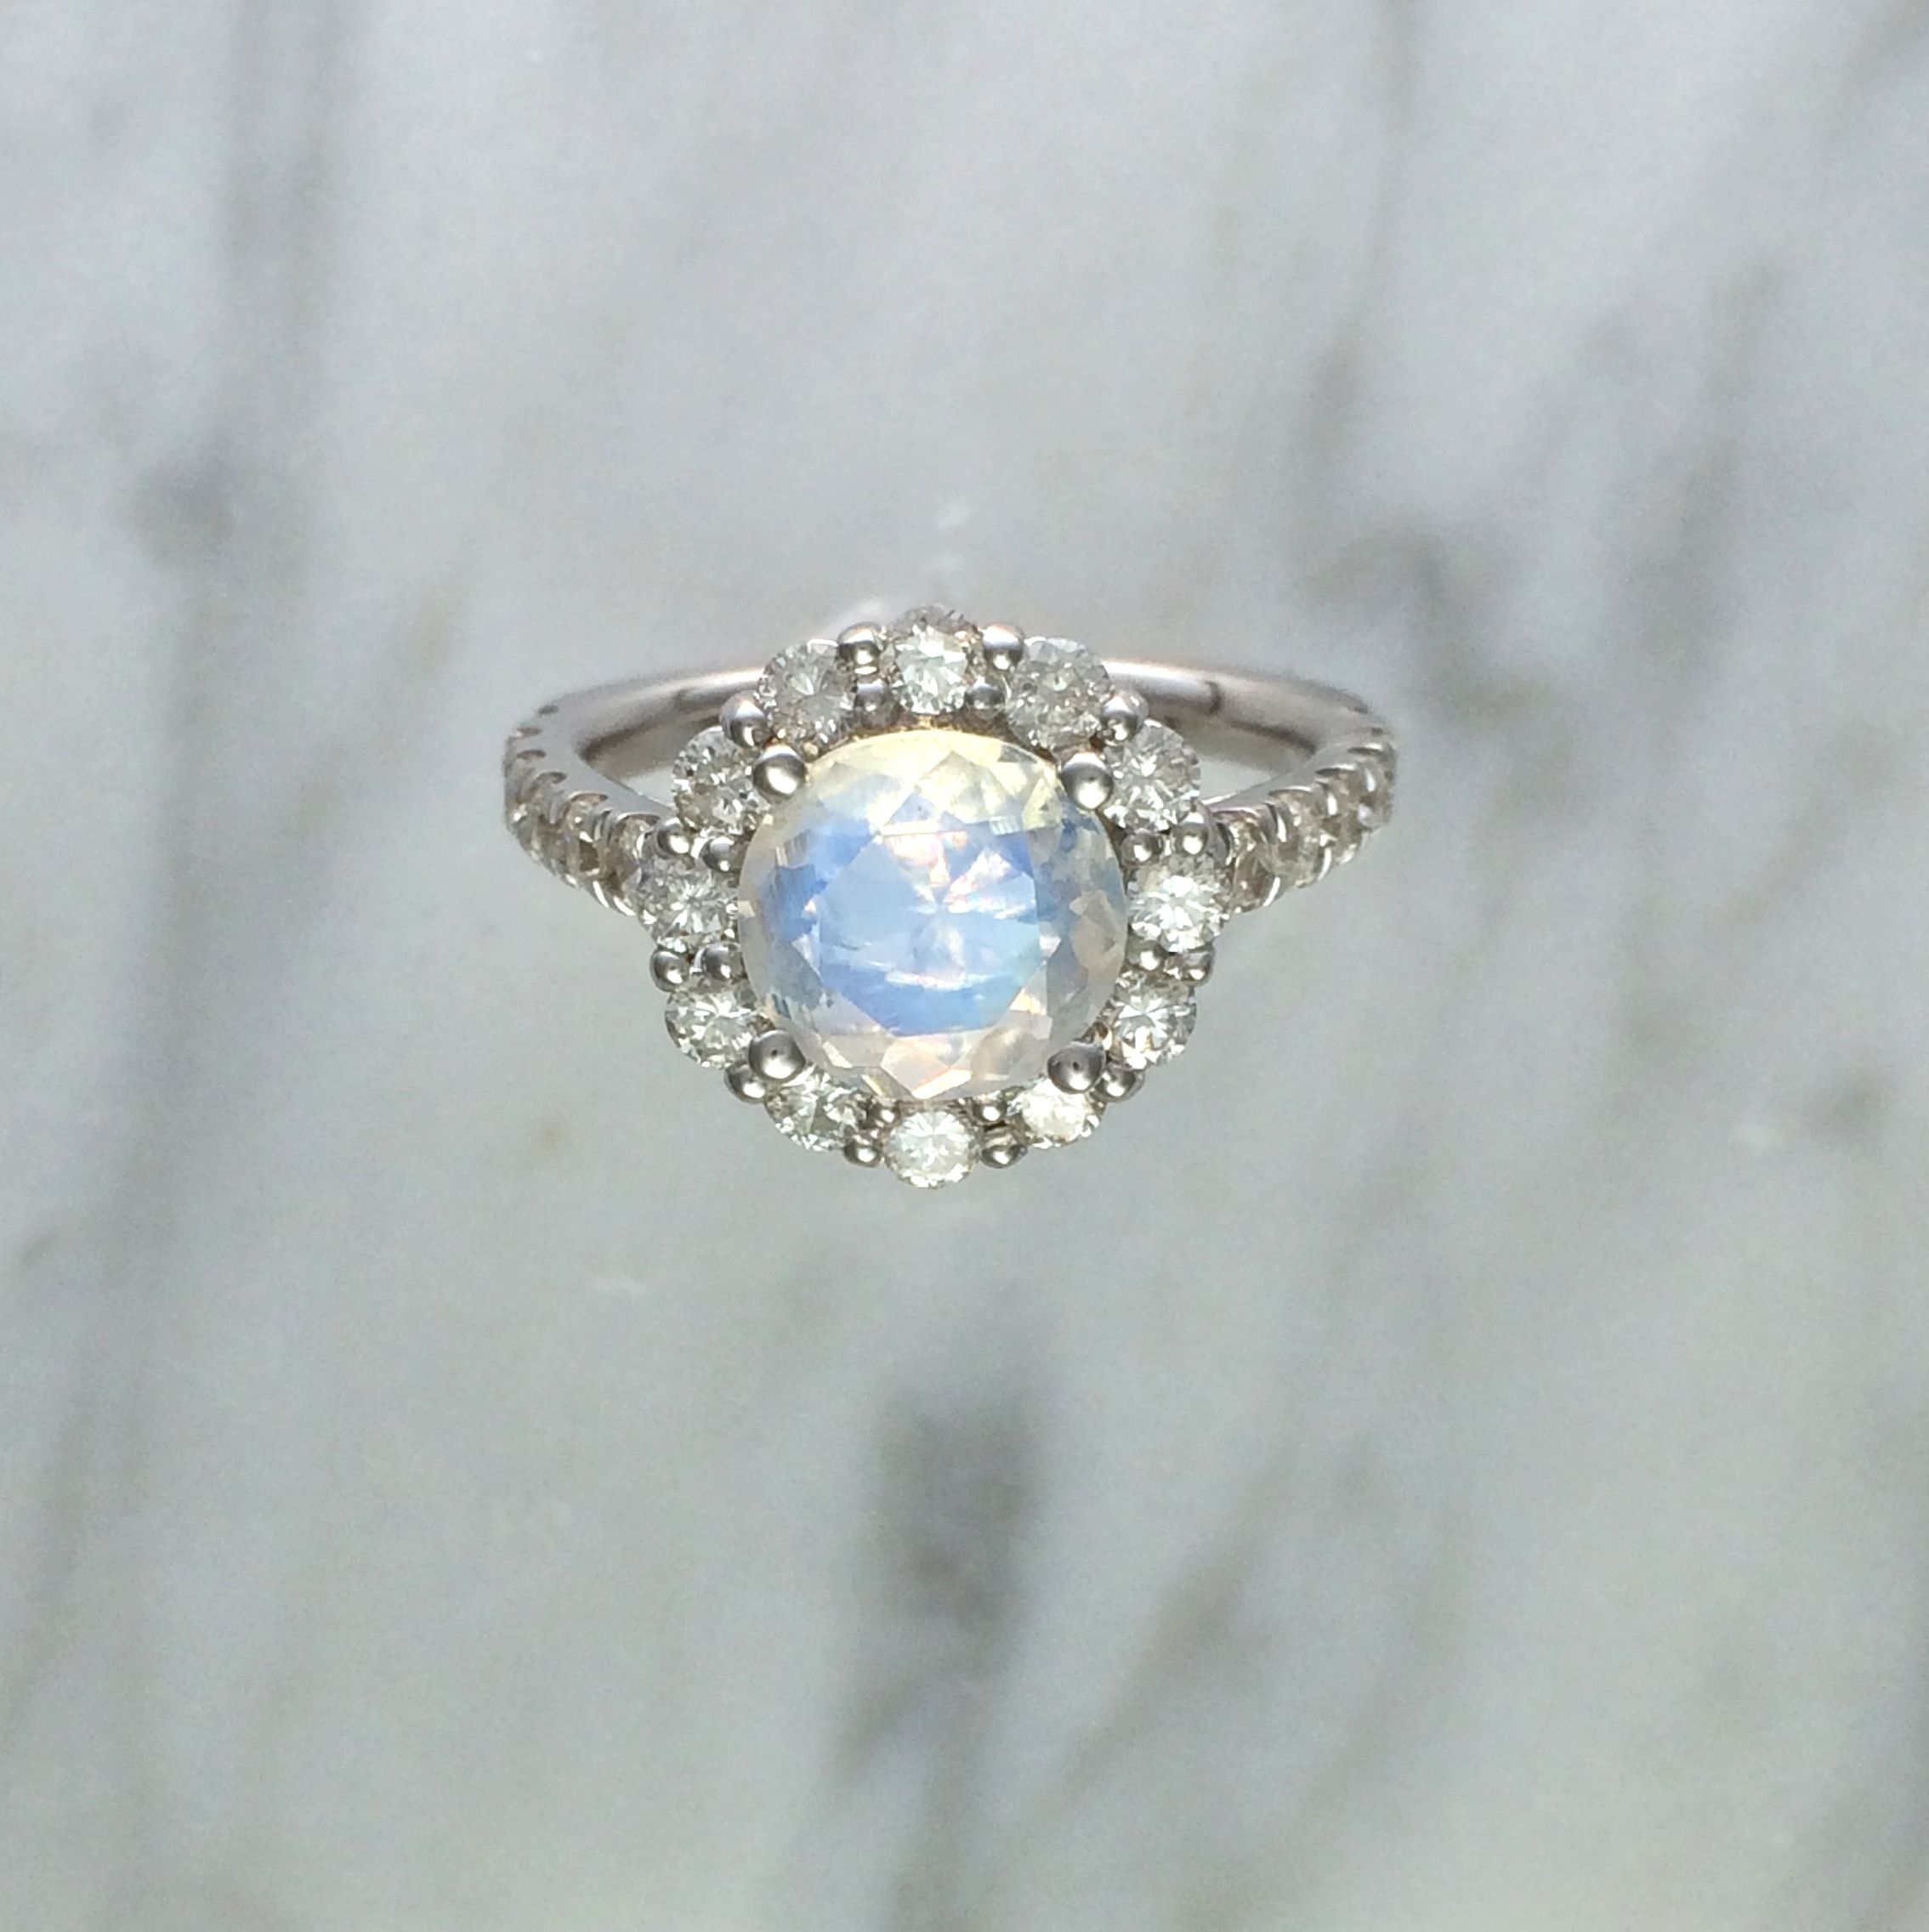 Buy A Hand Made Blue Rainbow Faceted Moonstone Diamond Halo Ring K